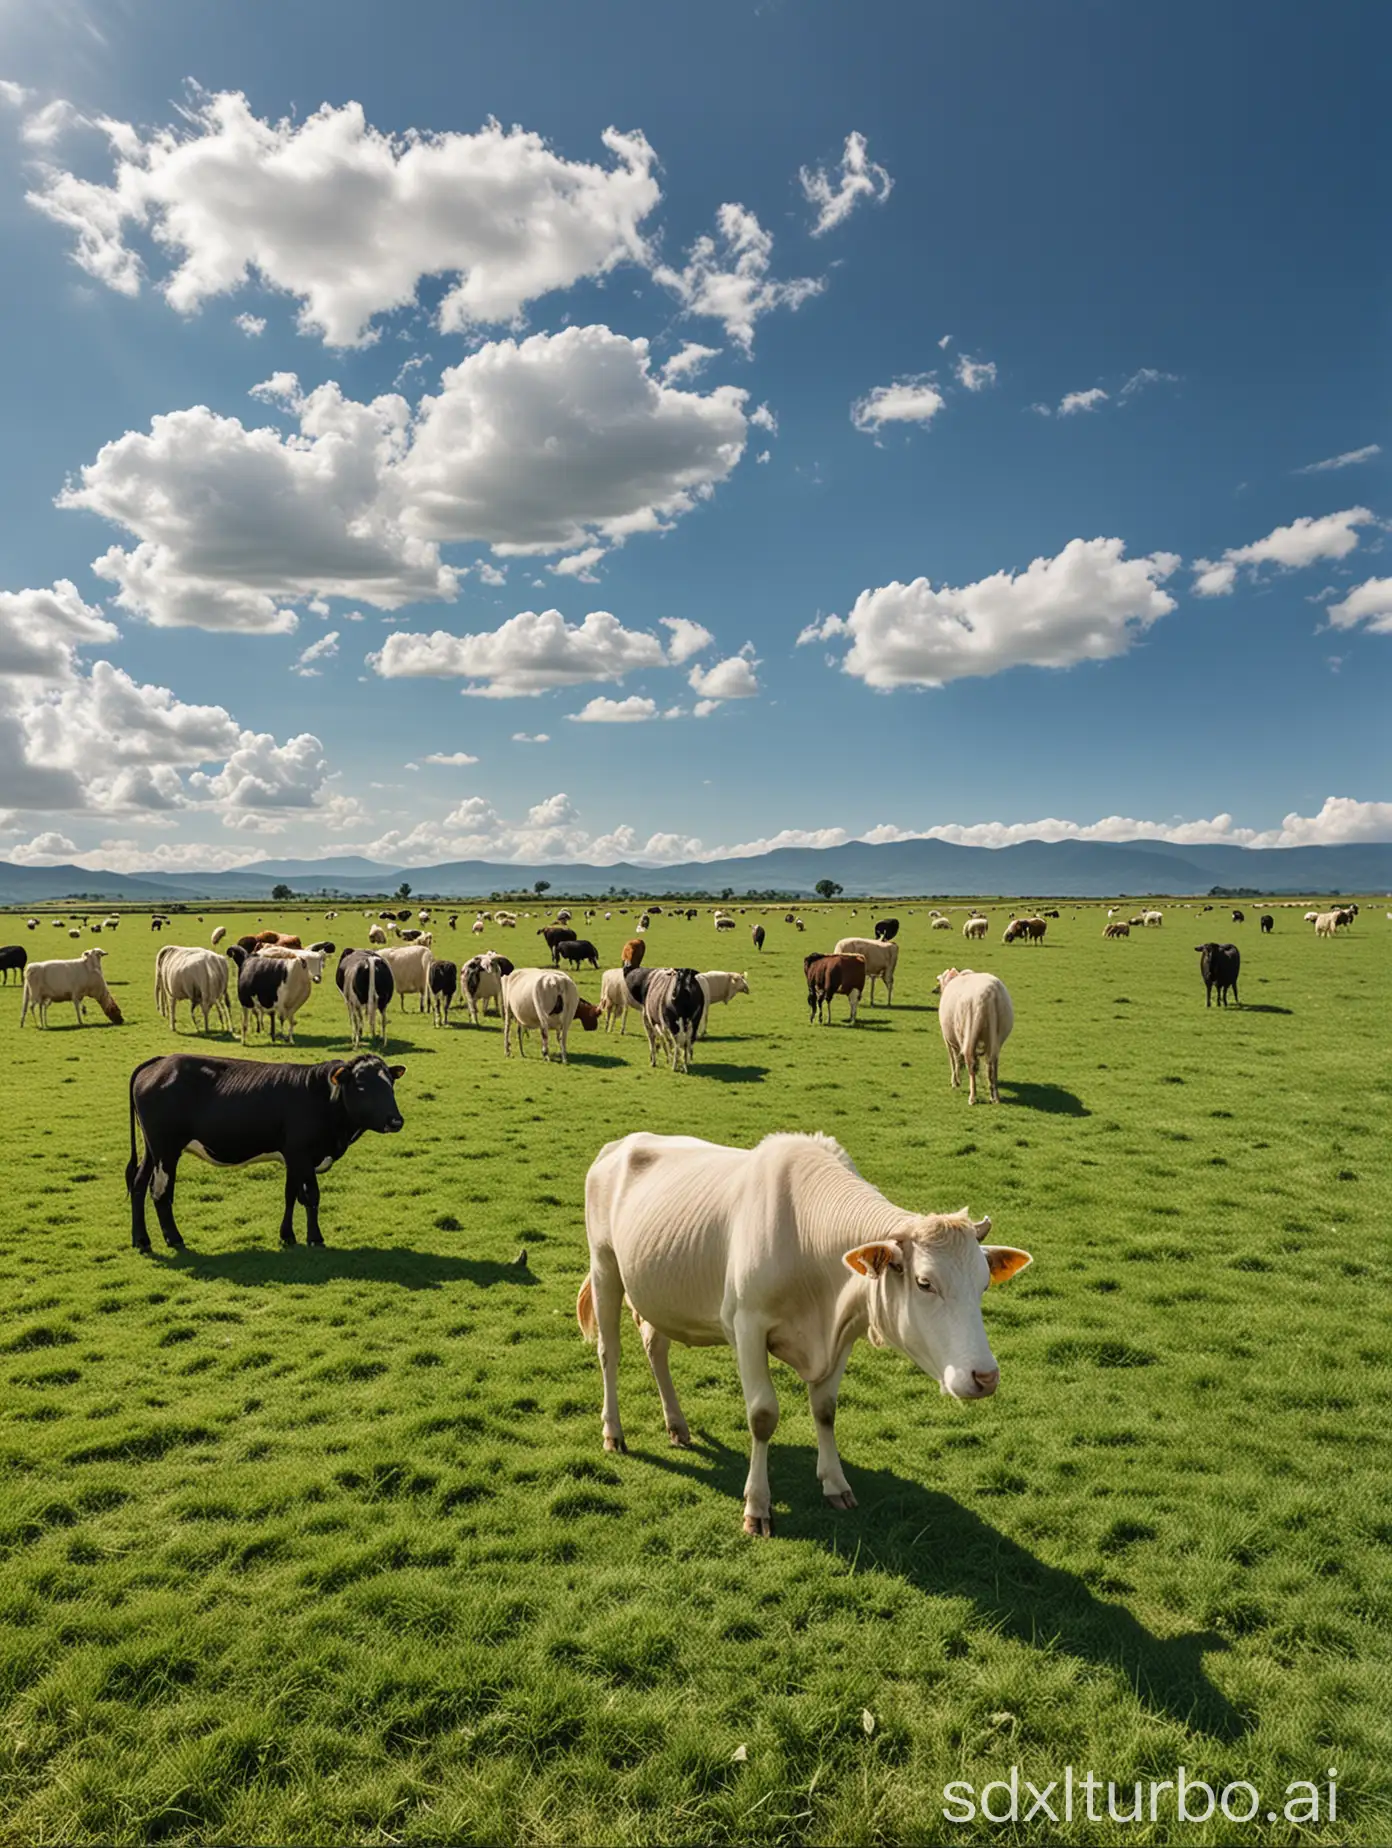 Countryside-Farm-Scene-with-Cows-Sheep-and-Chickens-Grazing-Under-Blue-Sky